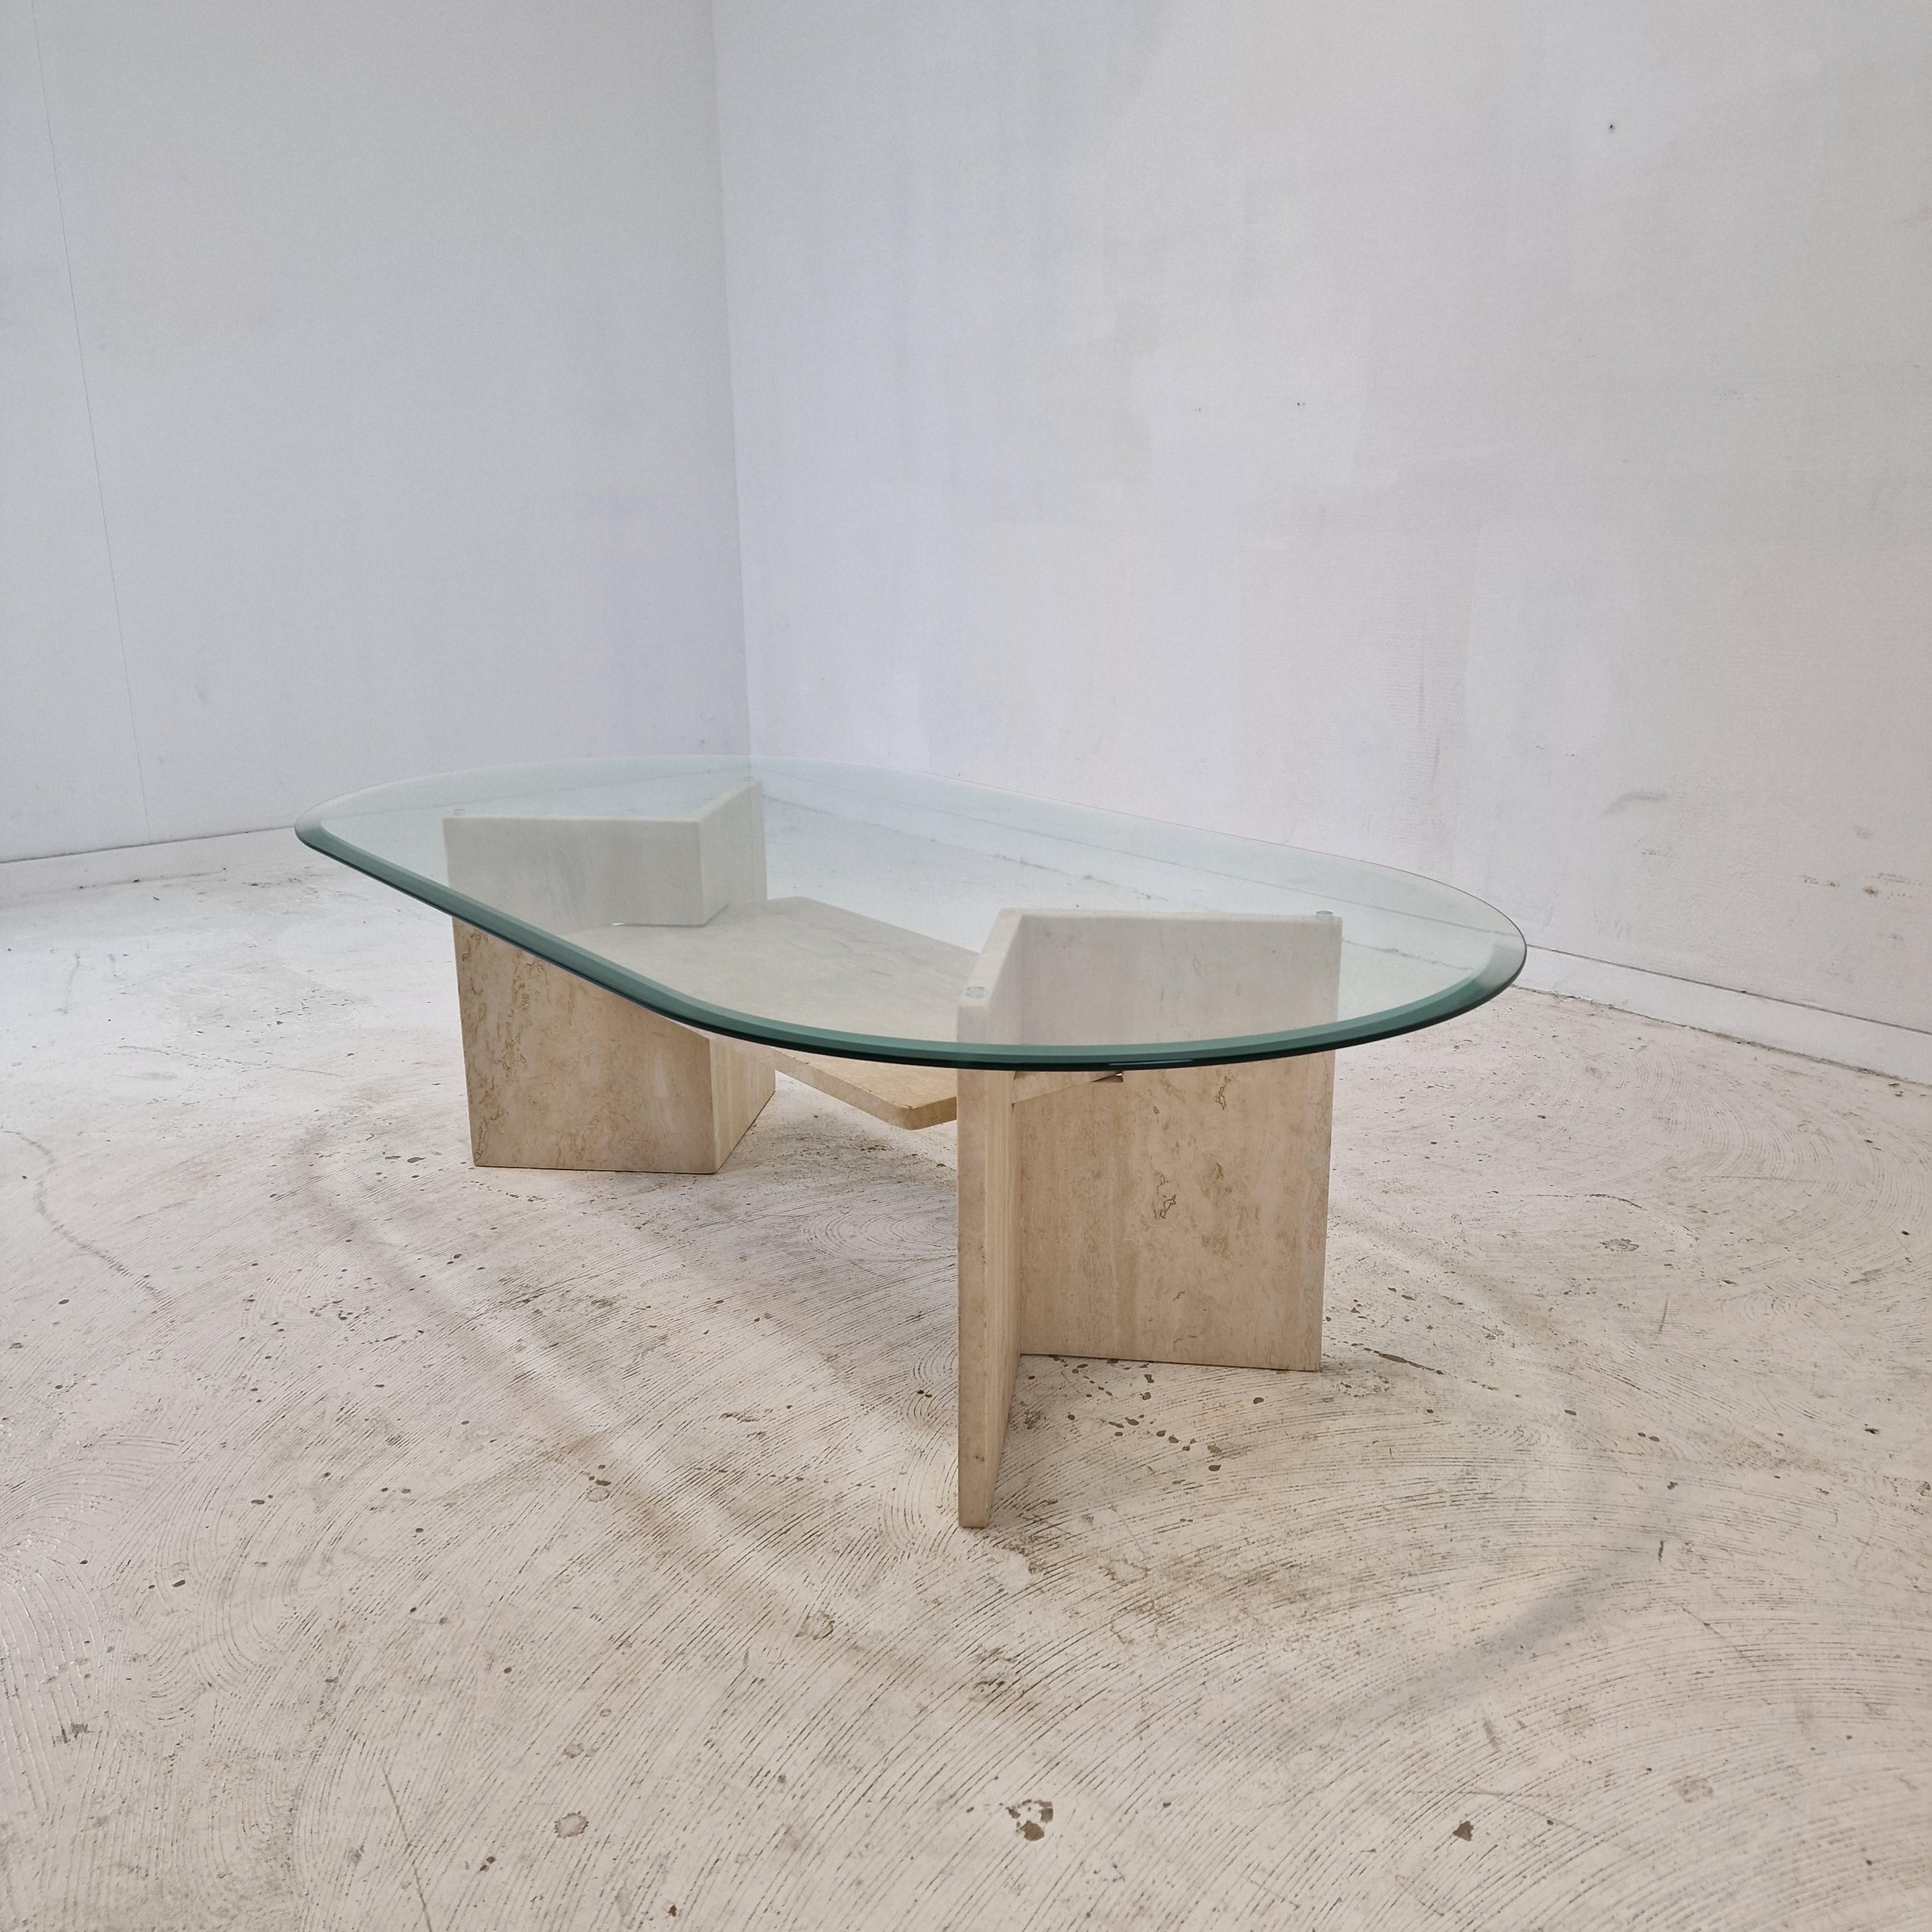 Late 20th Century Italian Coffee Table in Travertine and Facet Cut Glass, 1980s For Sale